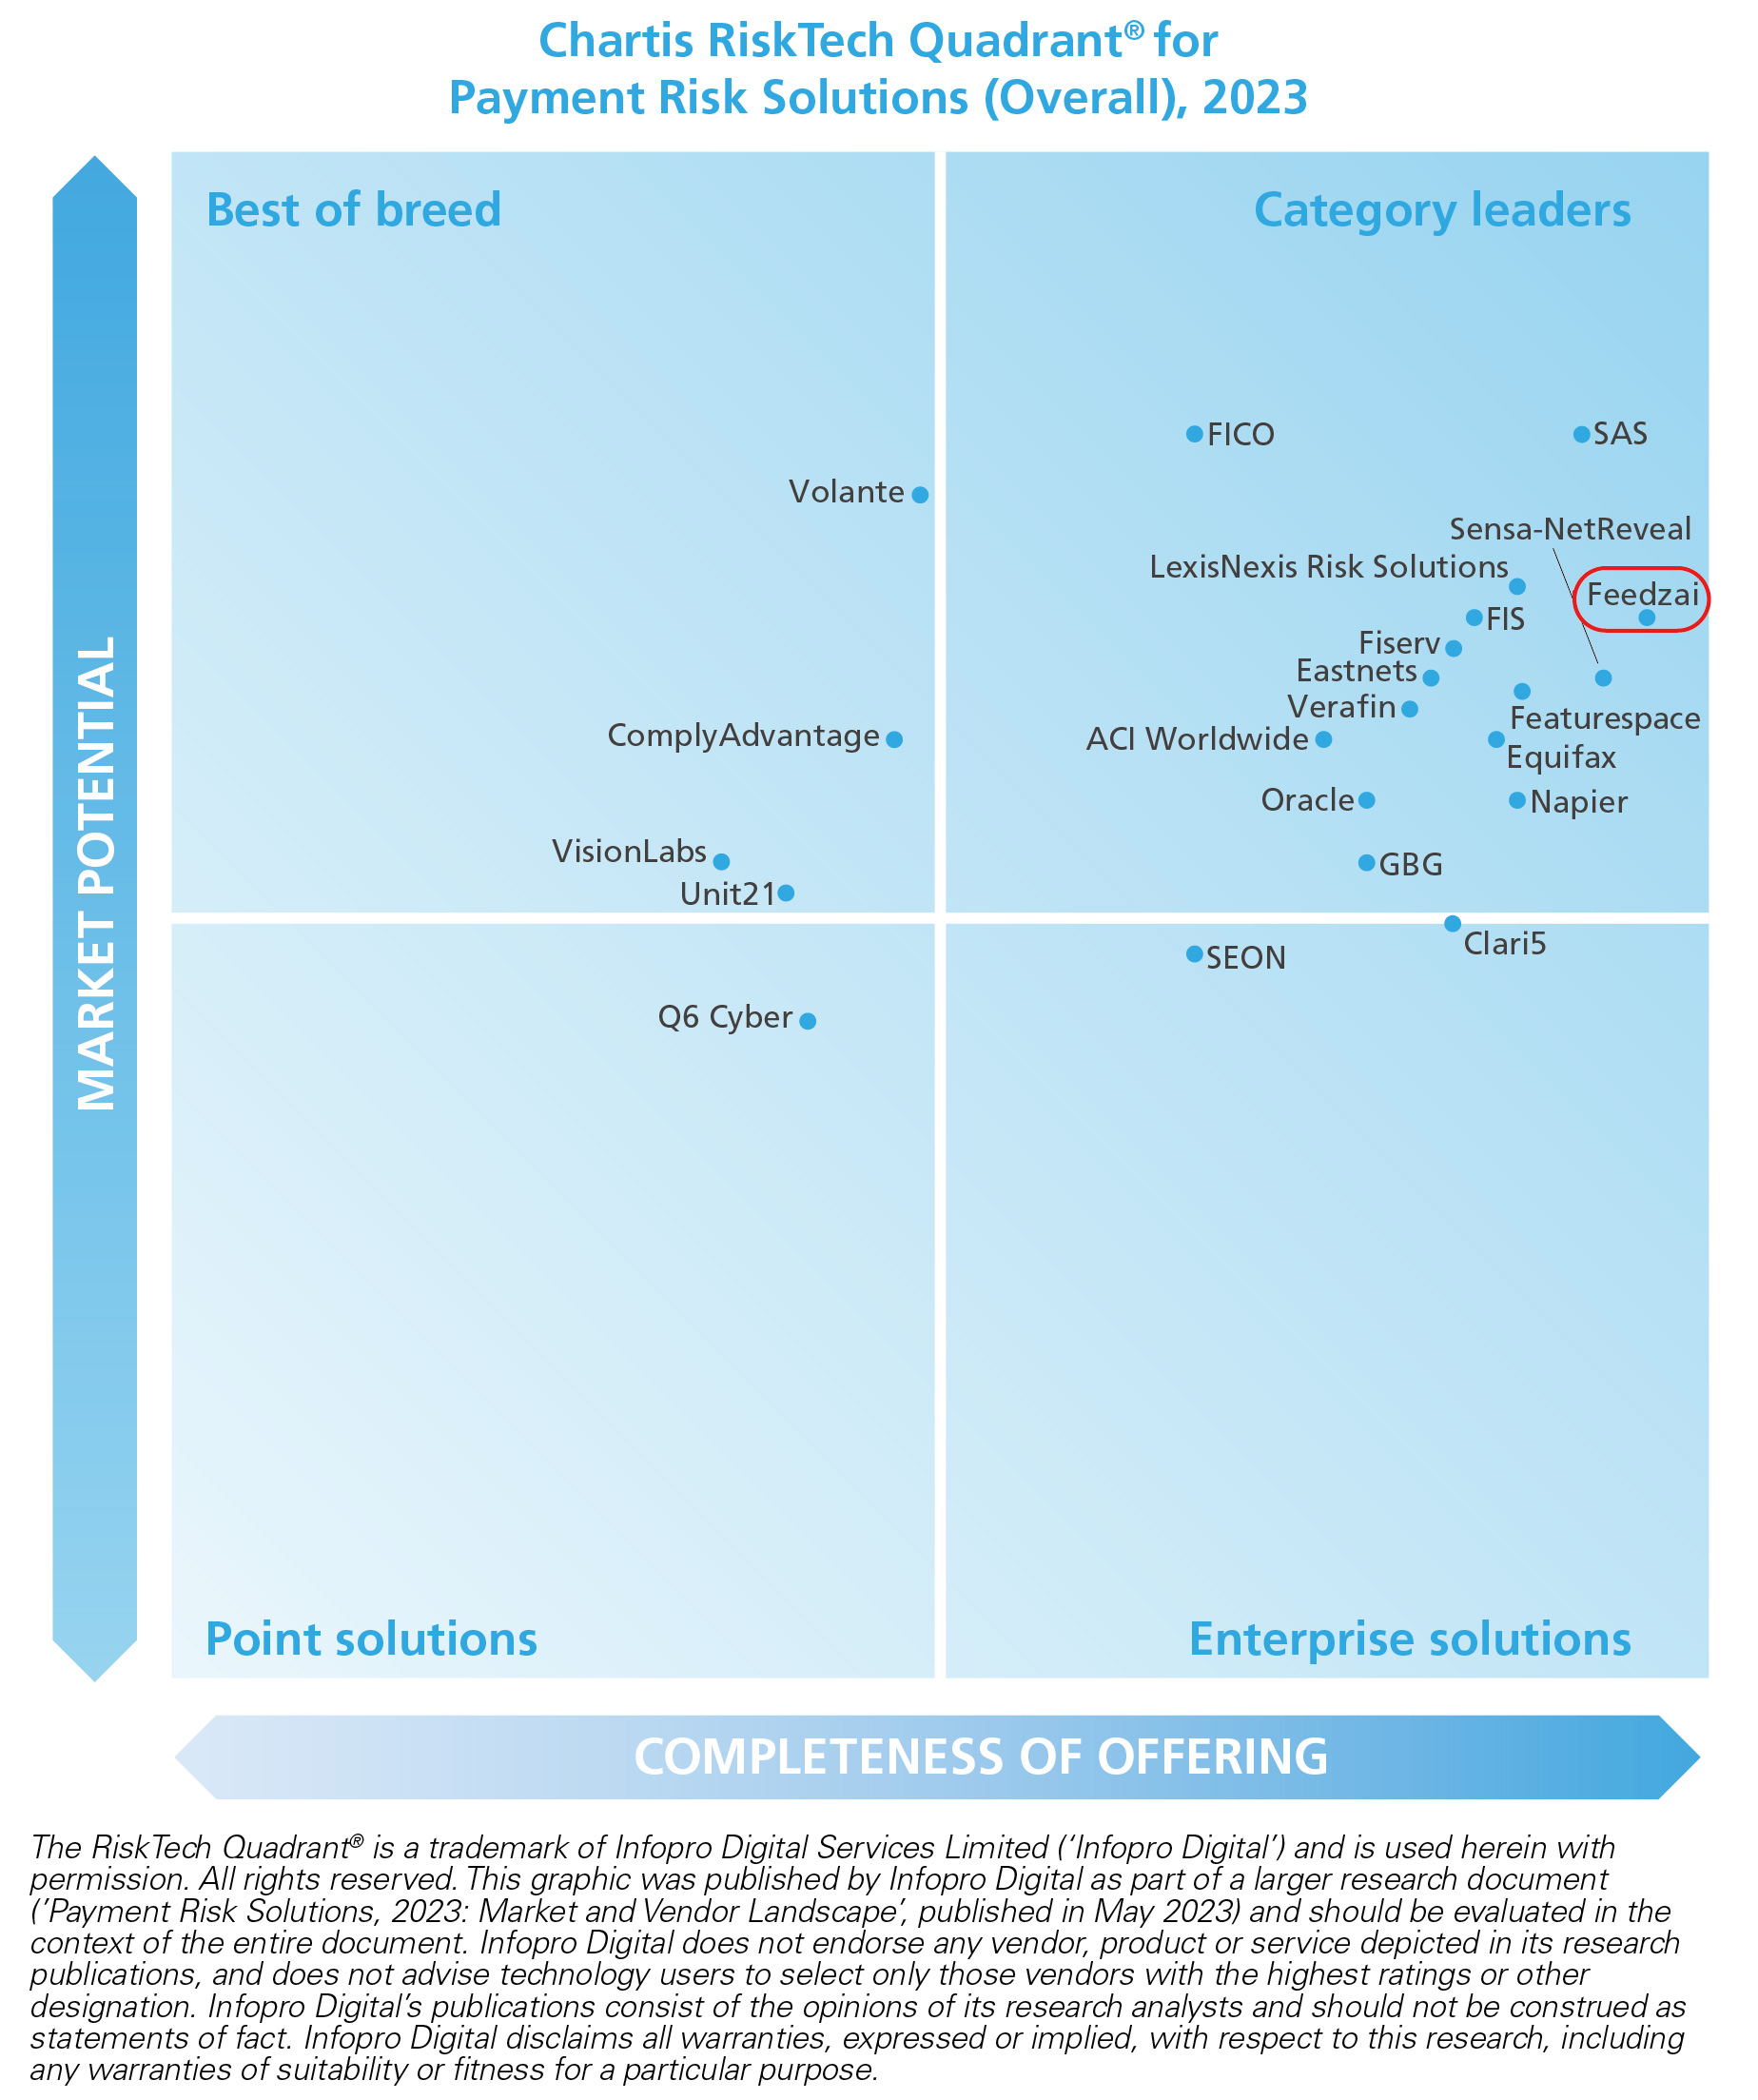 Graphic of Chartis RiskTech Quadrant for Payment Risk Solutions (Overall), 2023. Feedzai's name is circled as a Category Leader